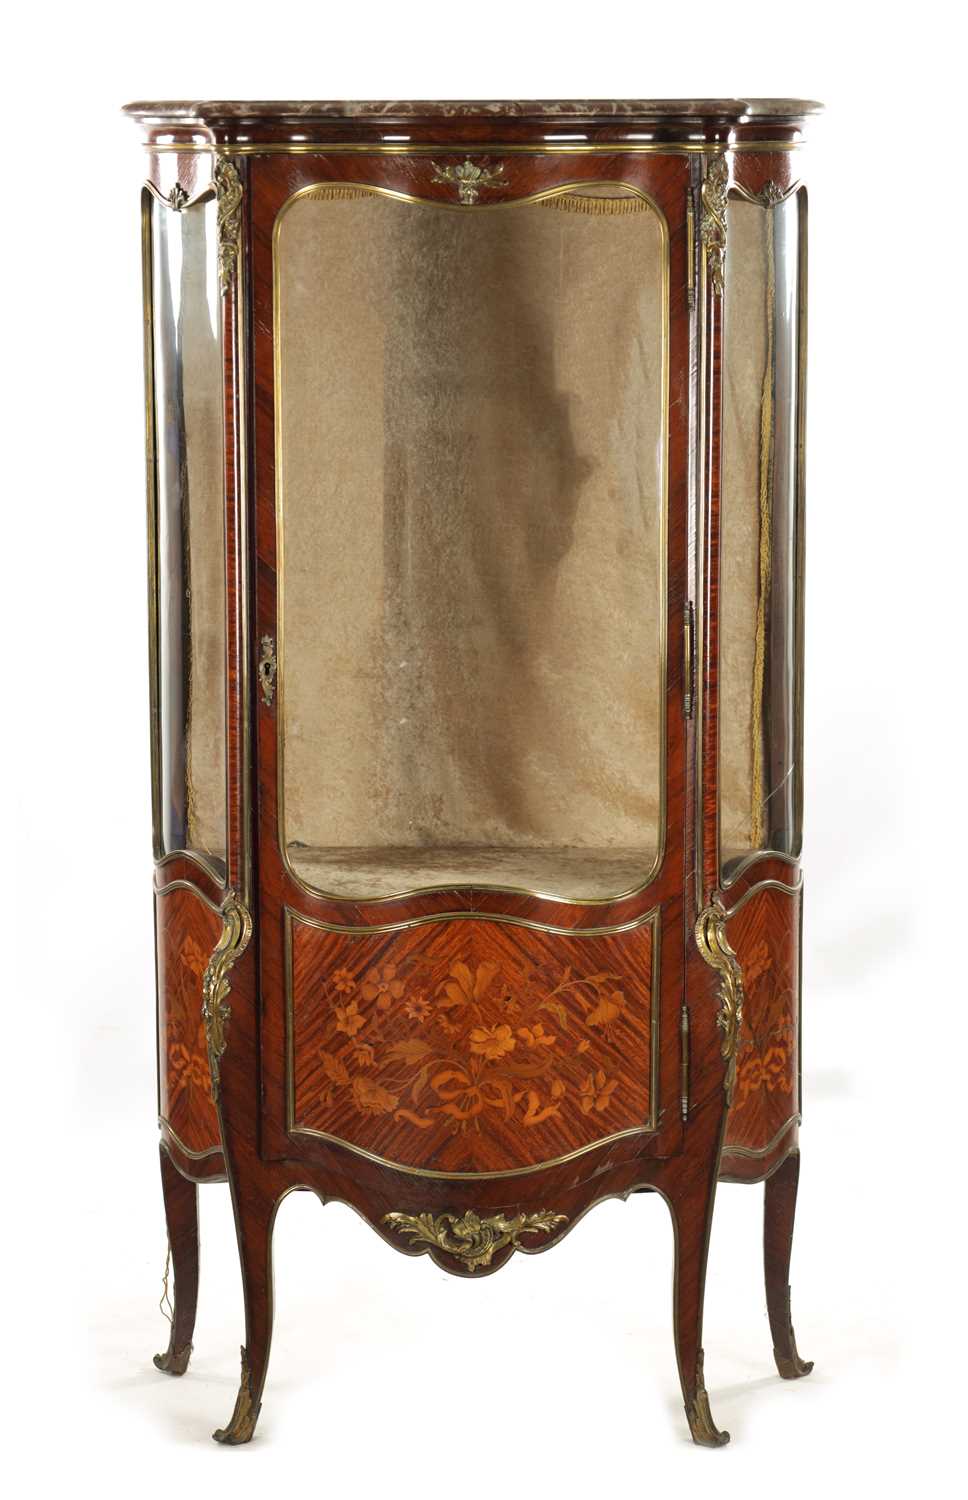 A 19TH CENTURY MARQUETRY INLAID ROSEWOOD RENE MARTIN DISPLAY CABINET / VITRENE